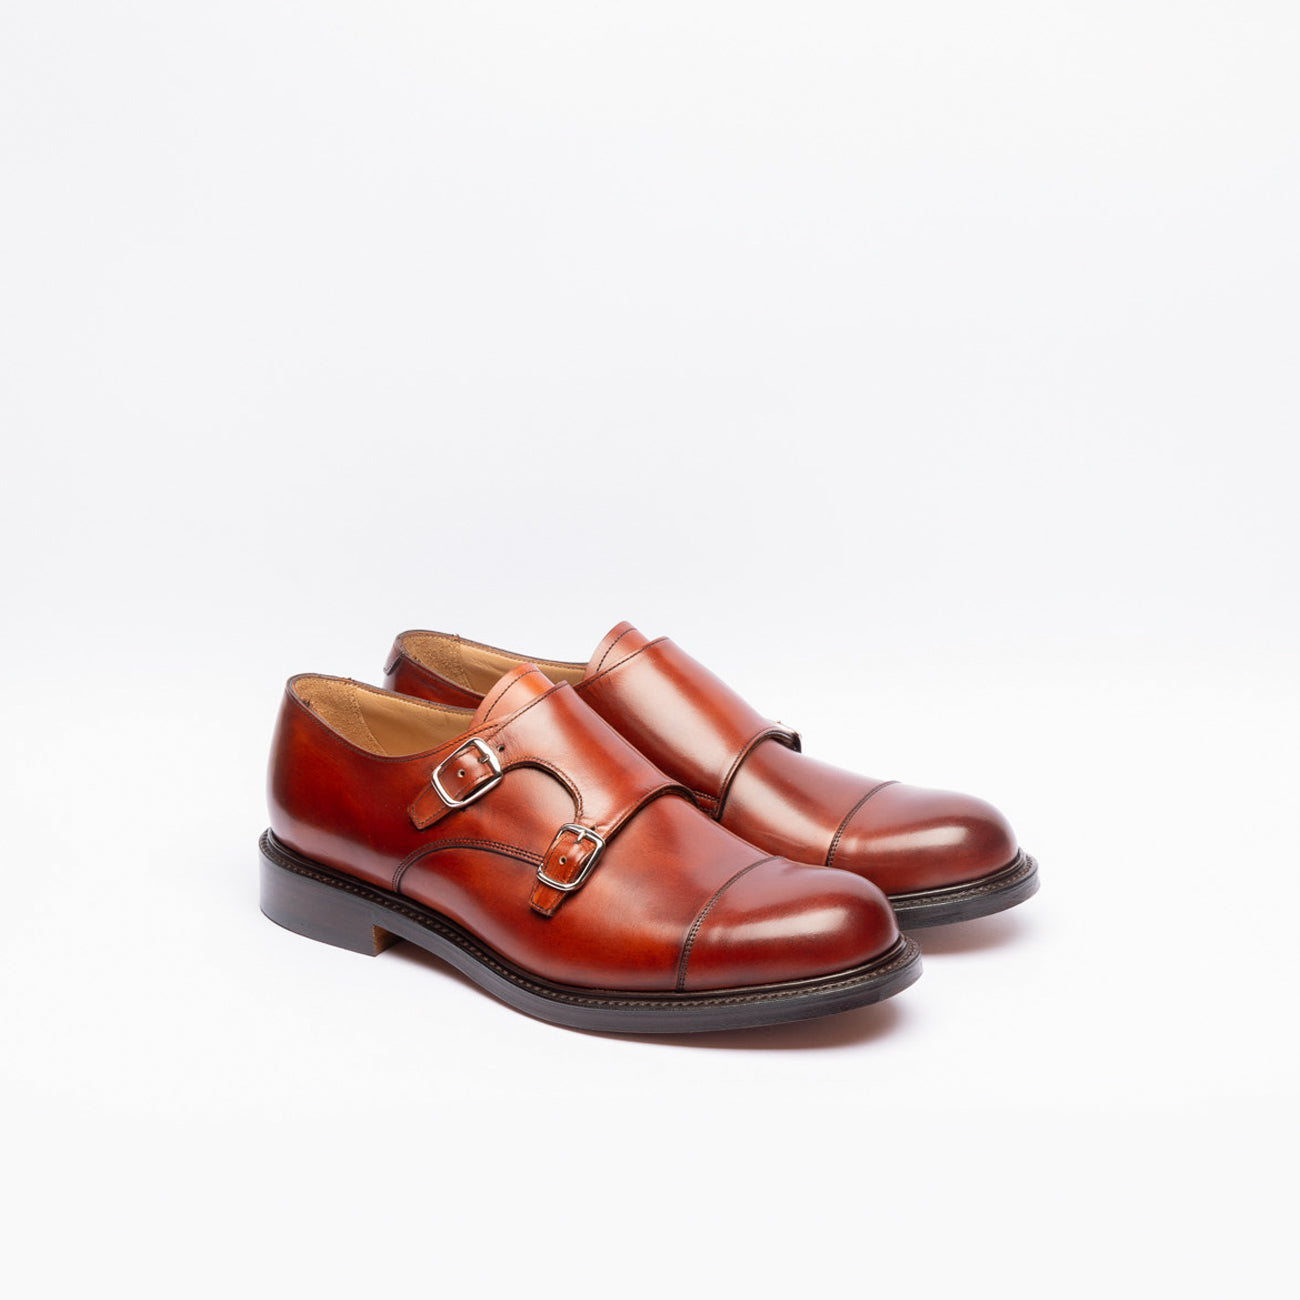 Cheaney Joseph & Sons Covent ALT Double Buckle Tan Leather Shoes